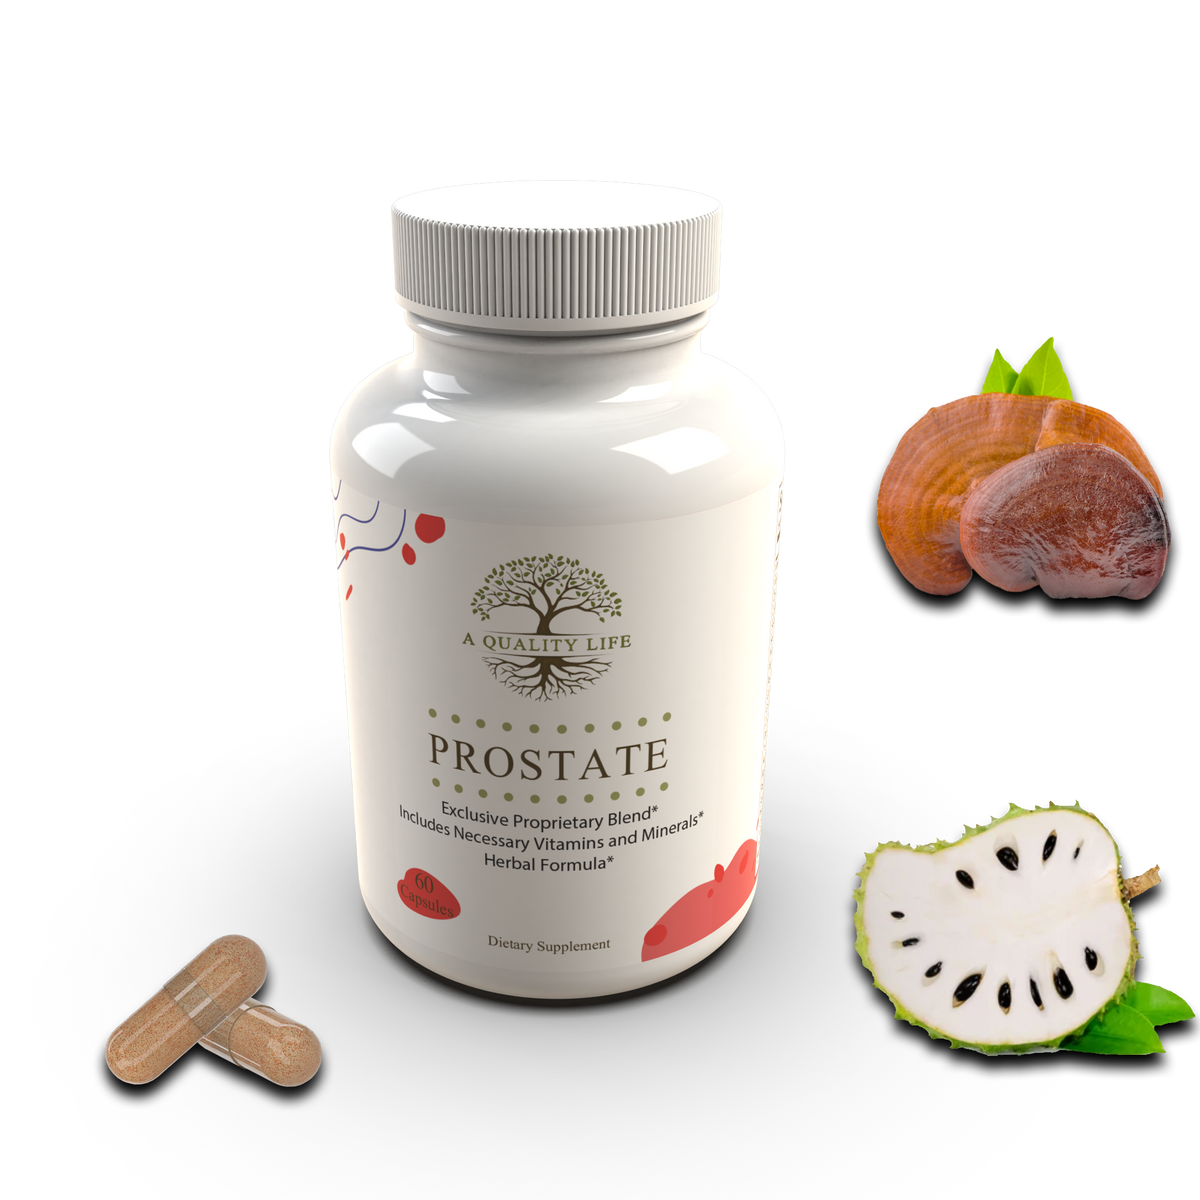 Prostate Supplement by A Quality Life Nutrition